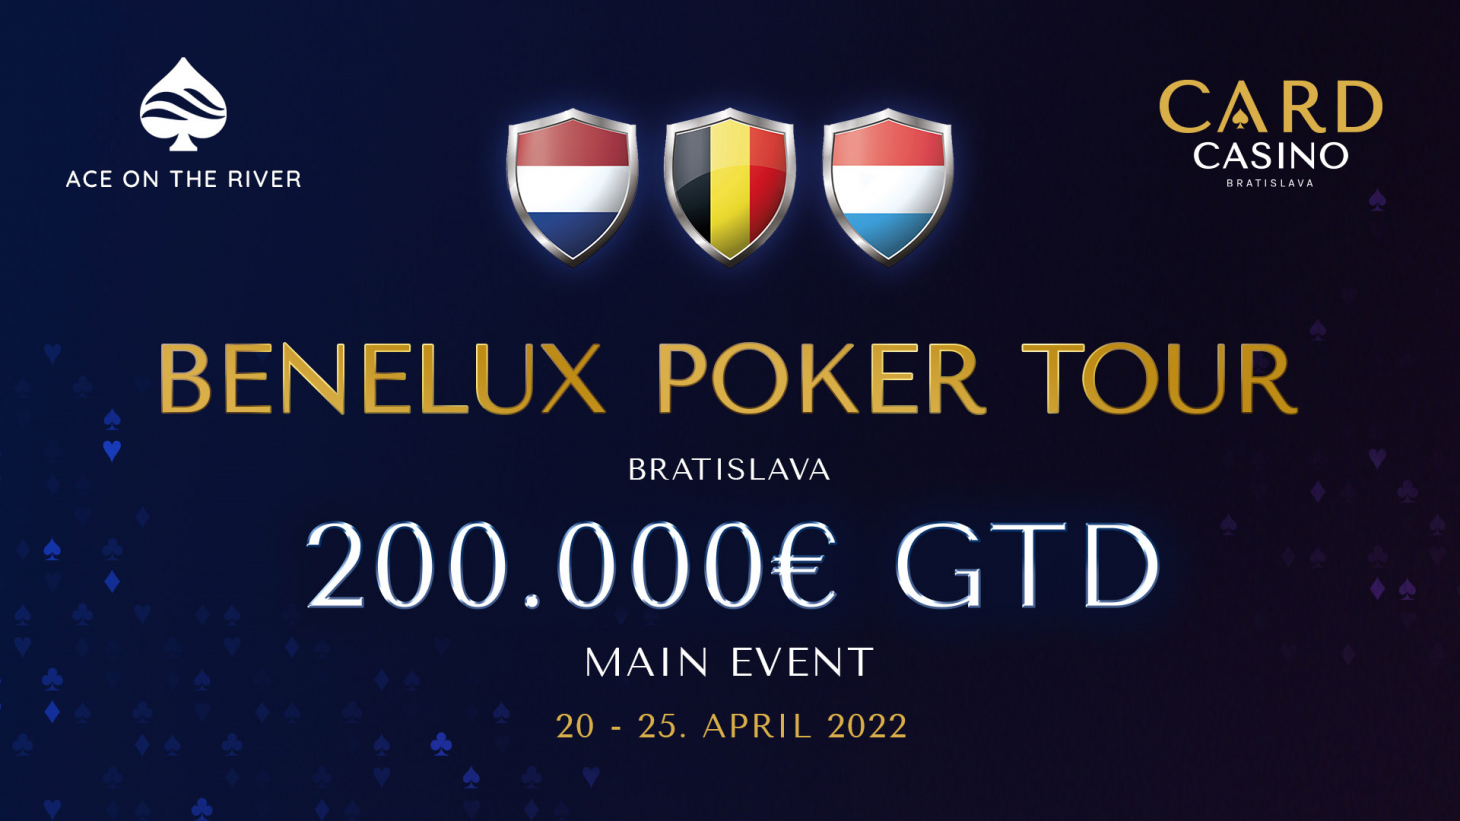 Card Casino Bratislava is inviting to Benelux Poker Tour with Main Event 200 000€ GTD